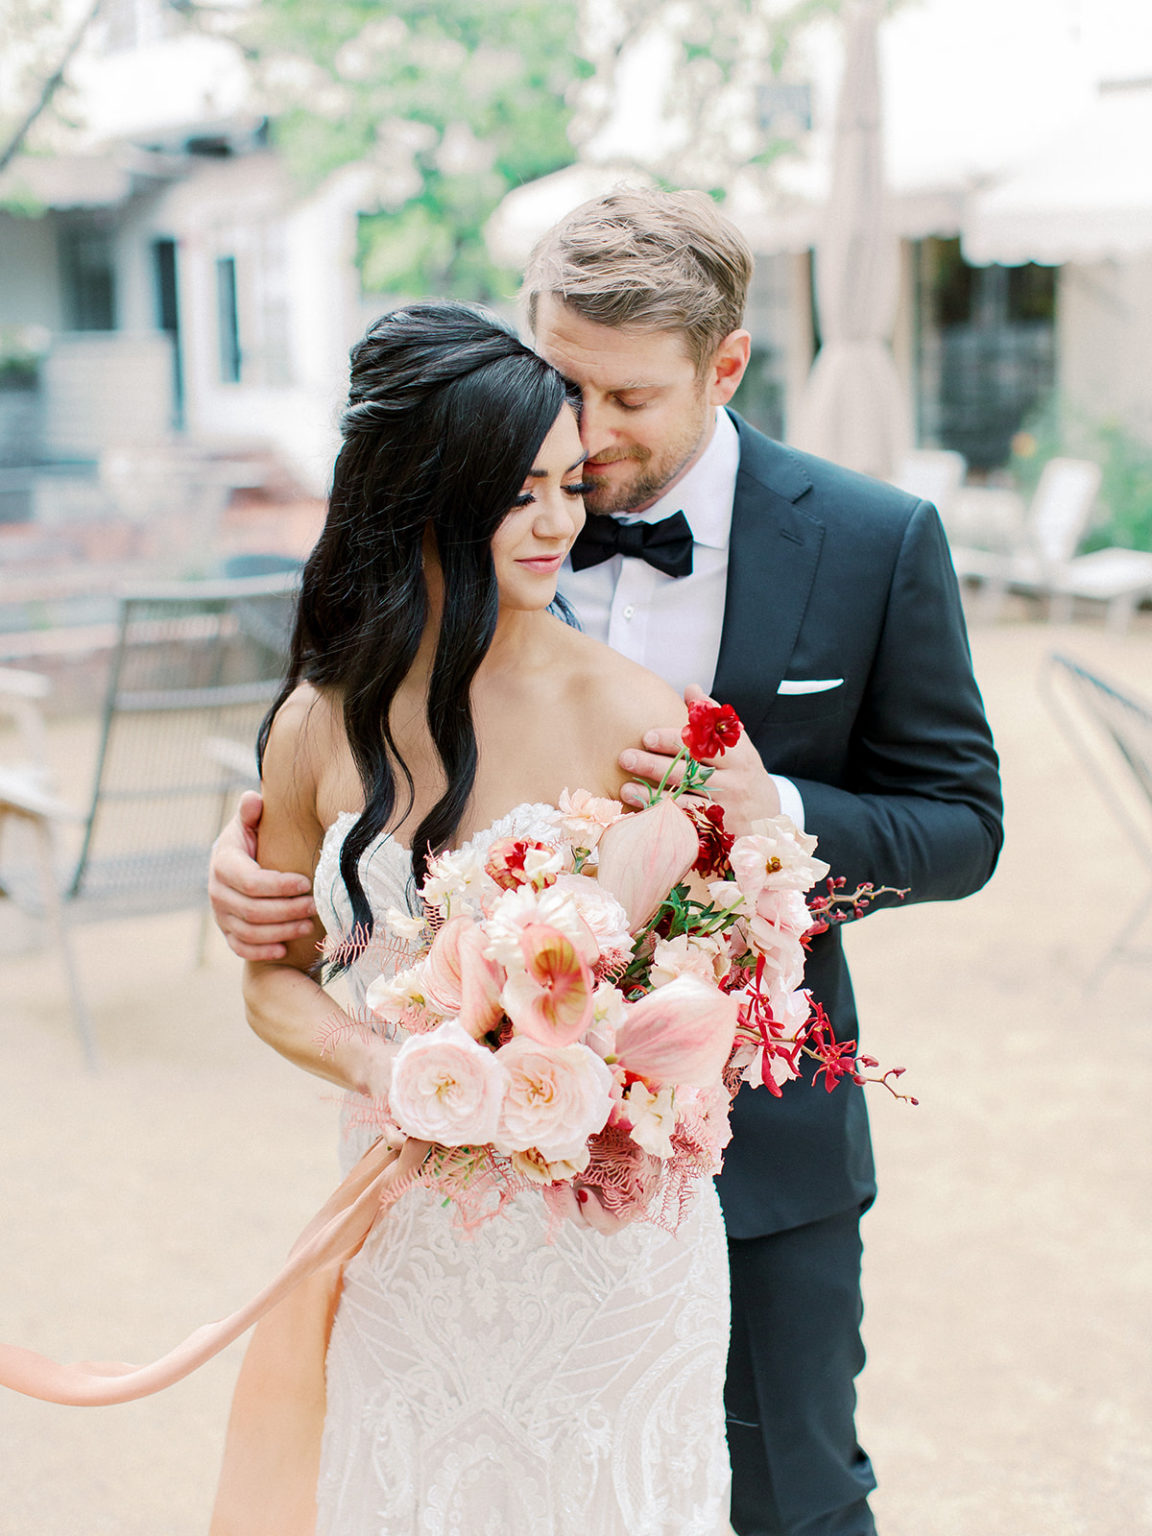 Jill + Christian | Whispering Rose Ranch | crownedevents.com